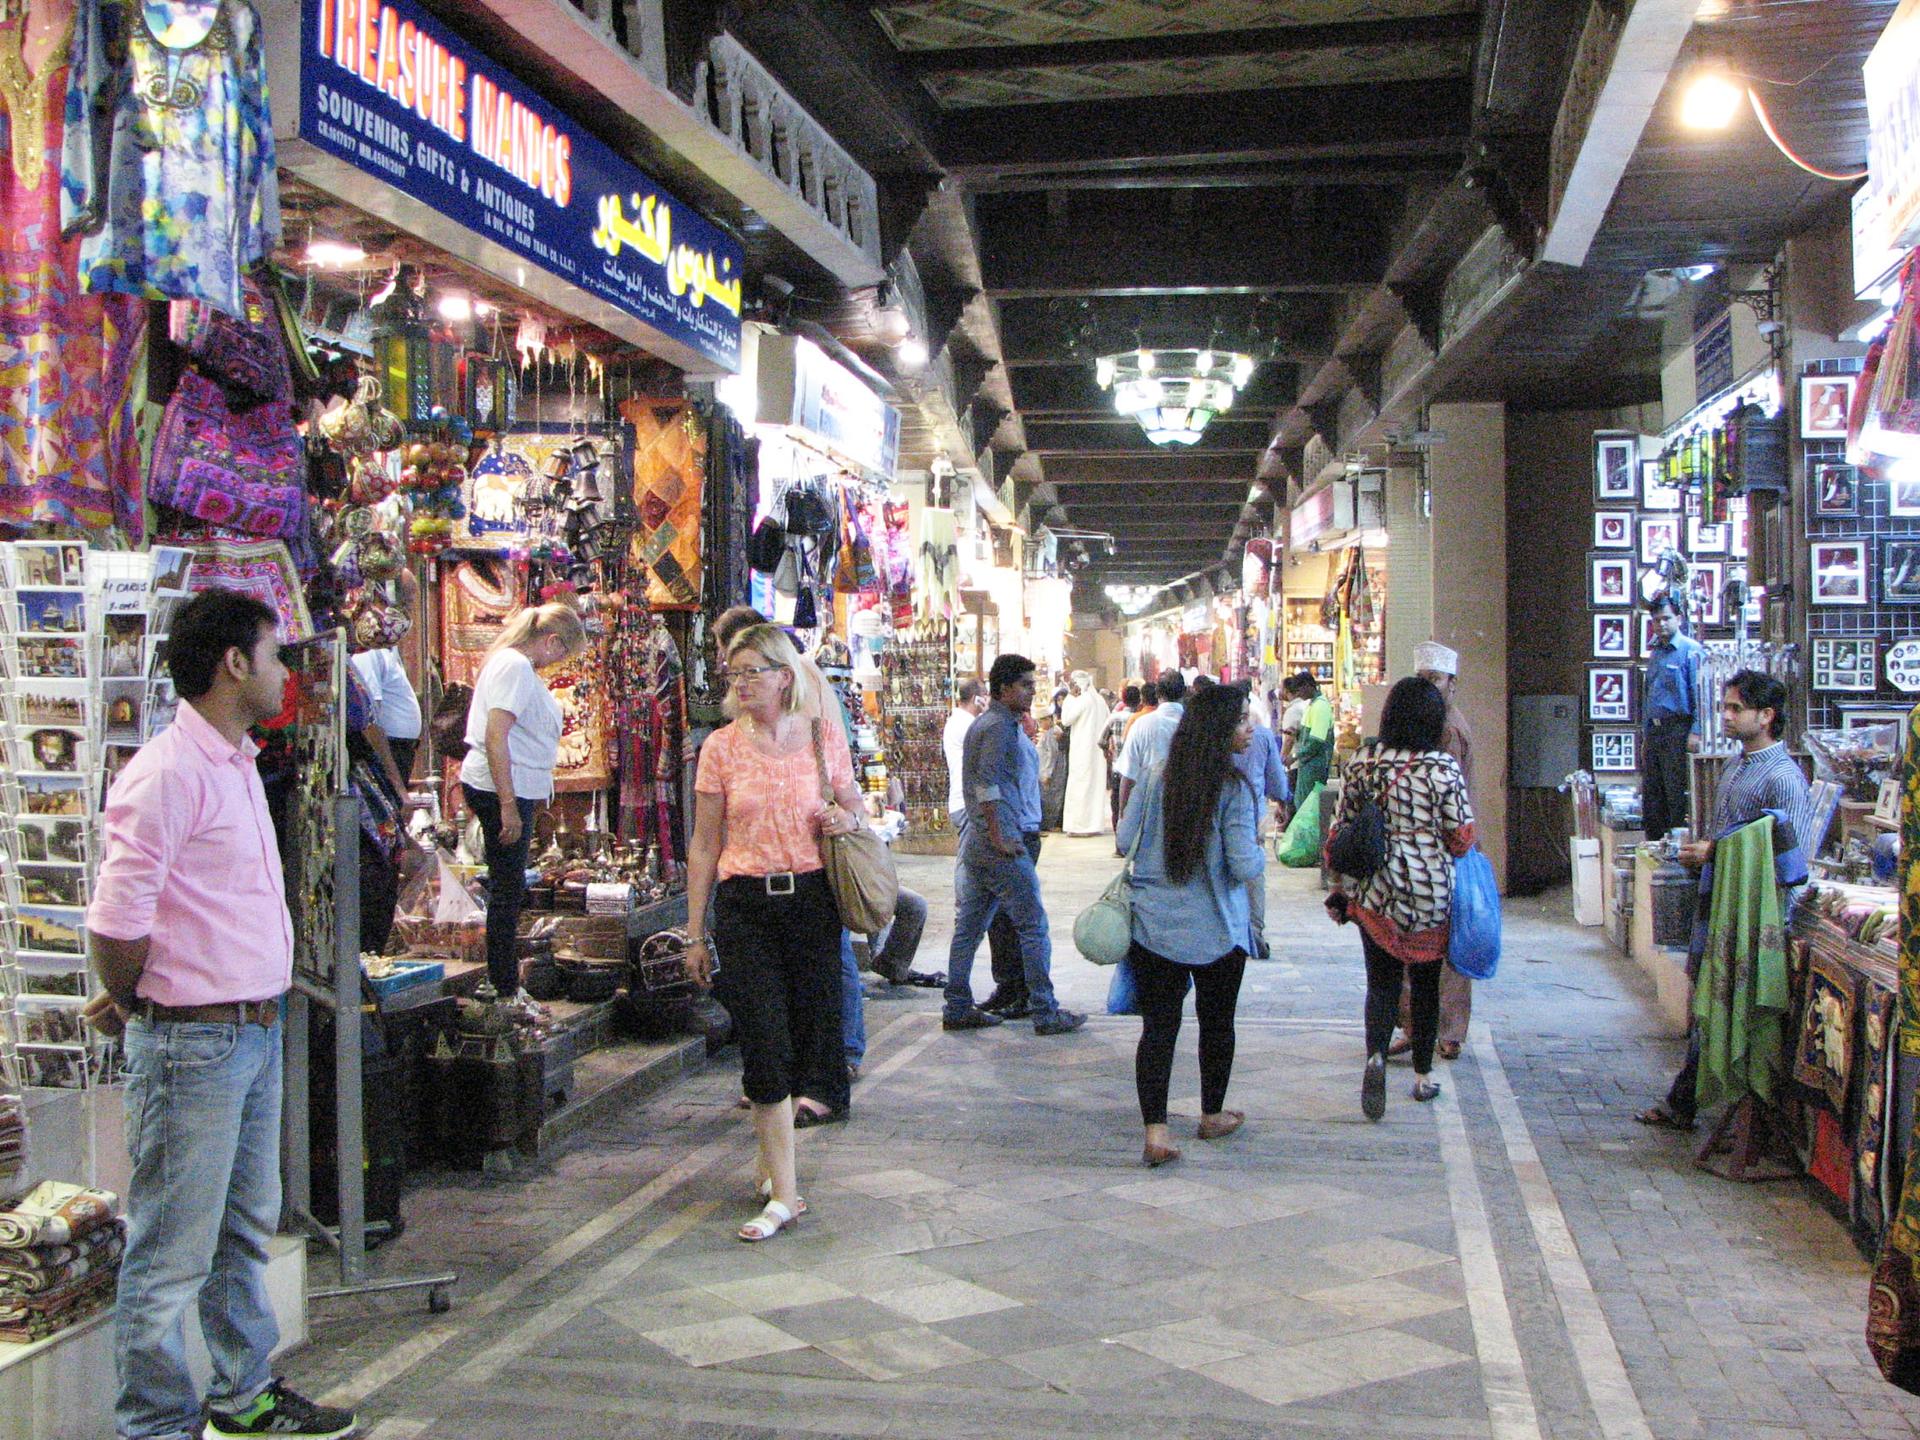 Shopping at the Muttrah souq.